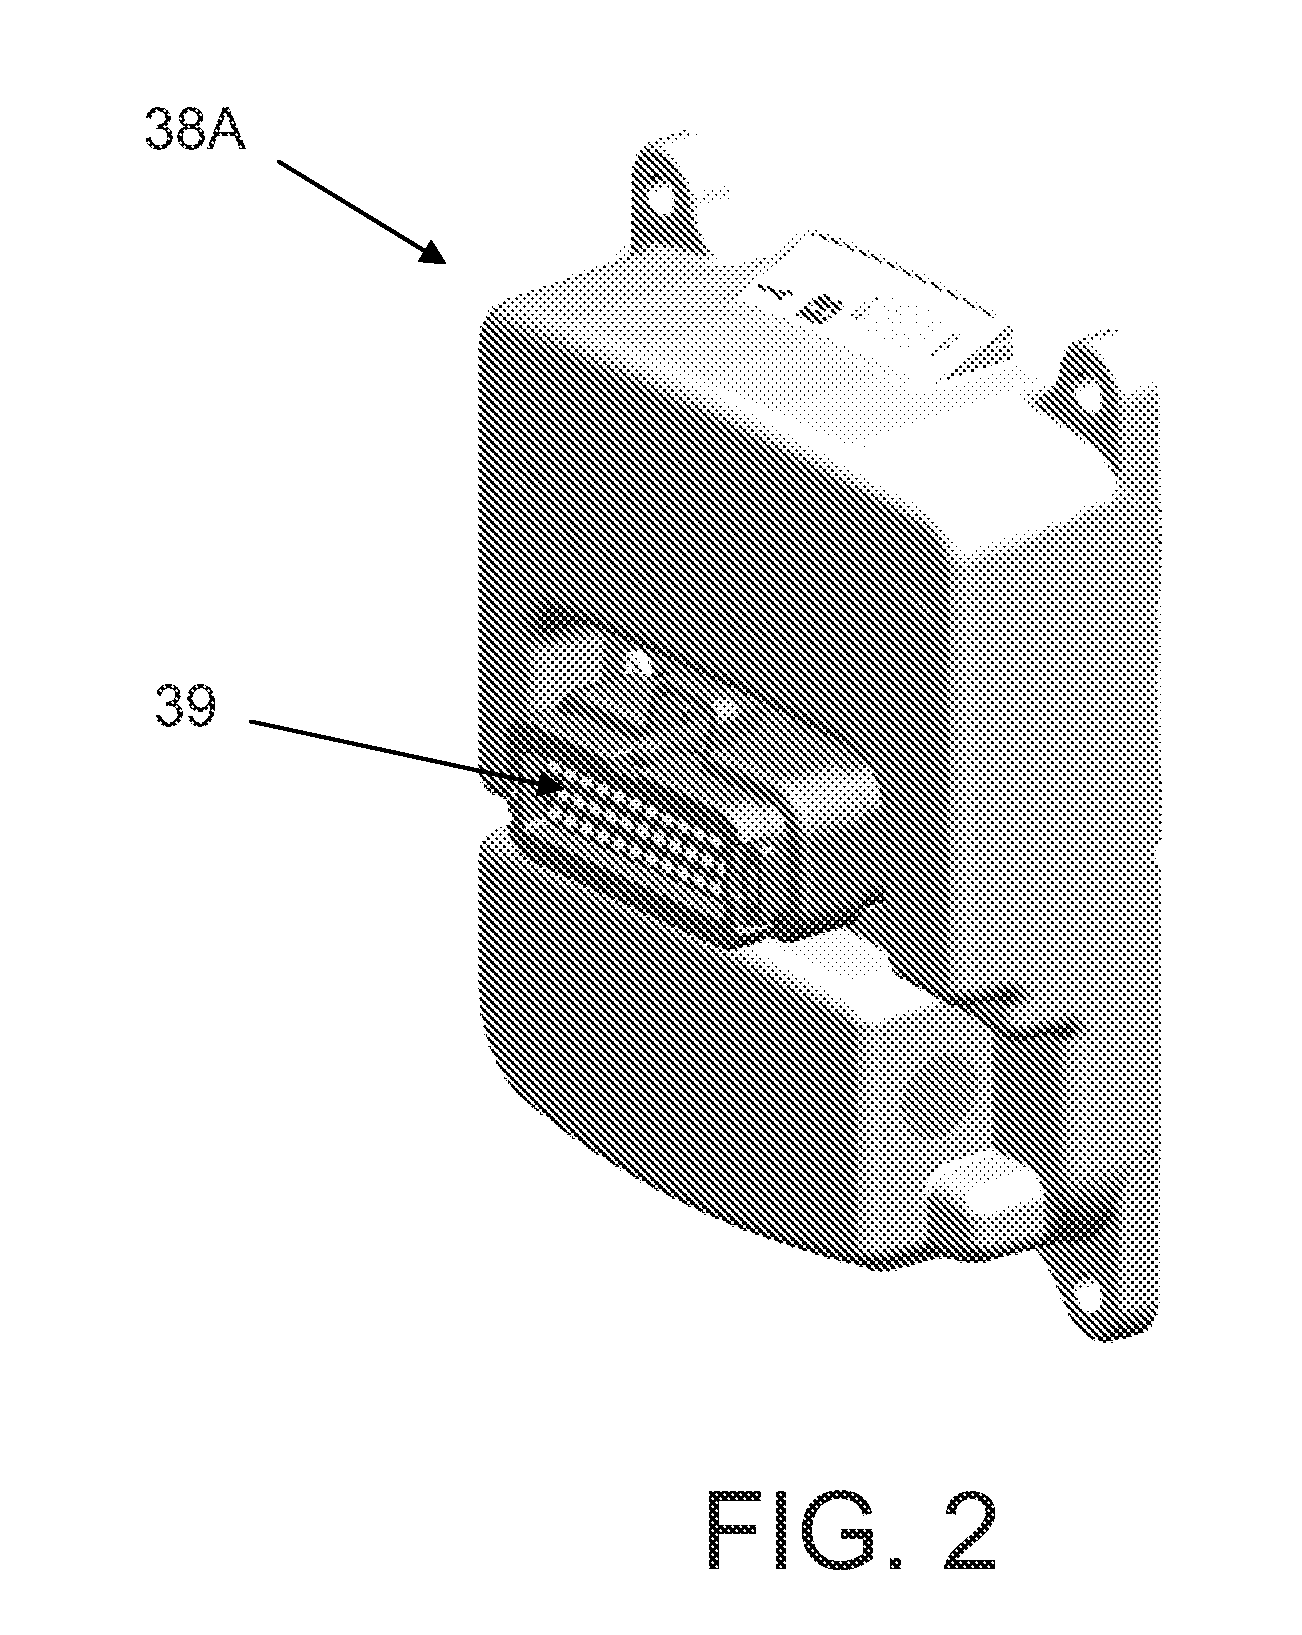 Information system for industrial vehicles including cyclical recurring vehicle information message